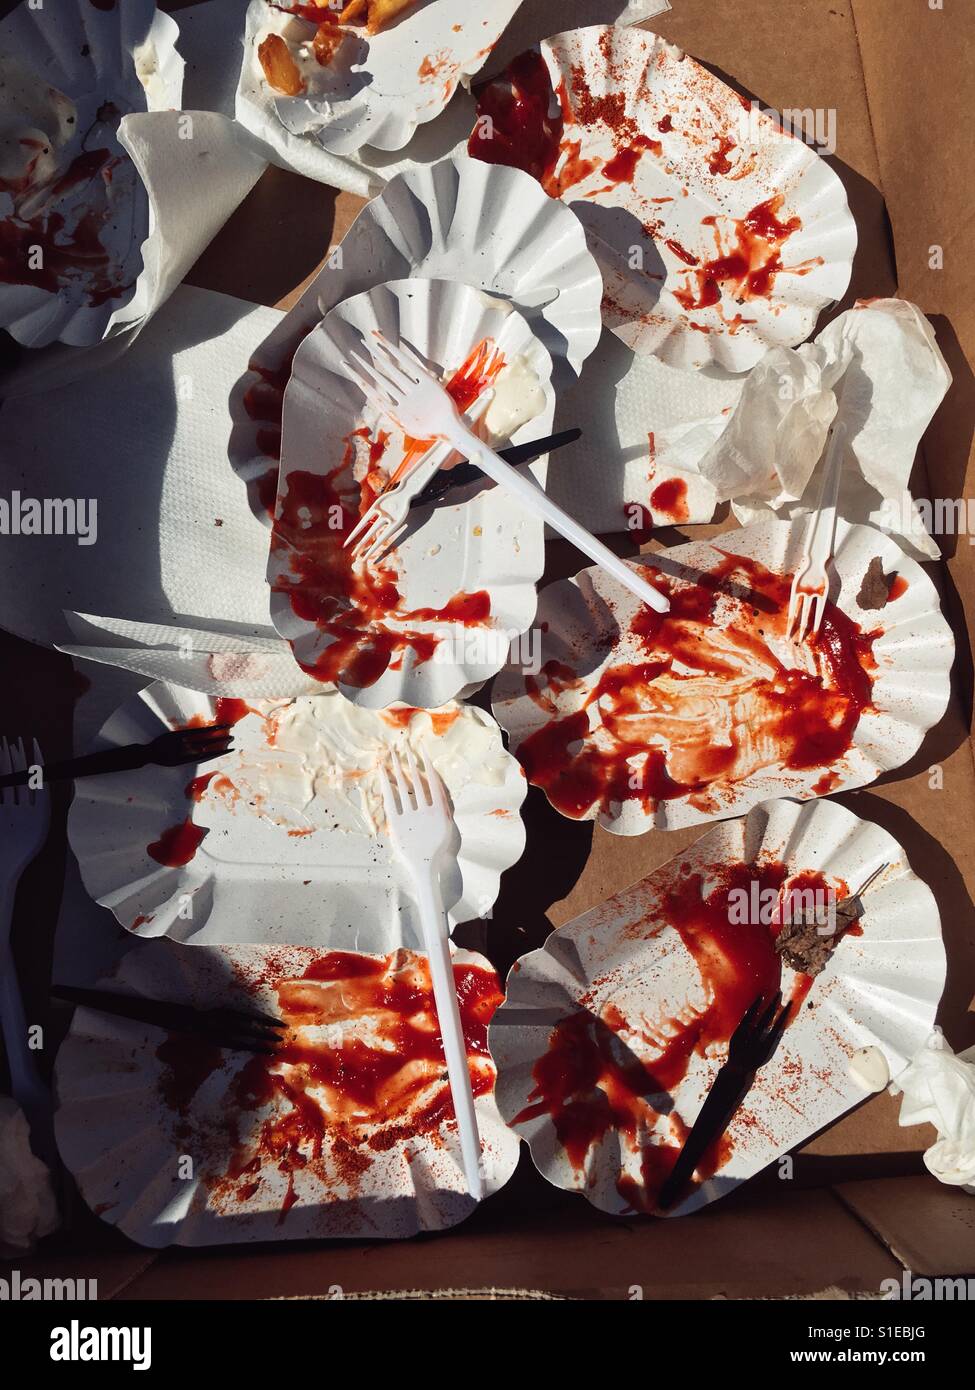 Leftovers of a meal of fries with ketchup and Mayonnaise and curry sausage on paper plates with plastic forks Stock Photo